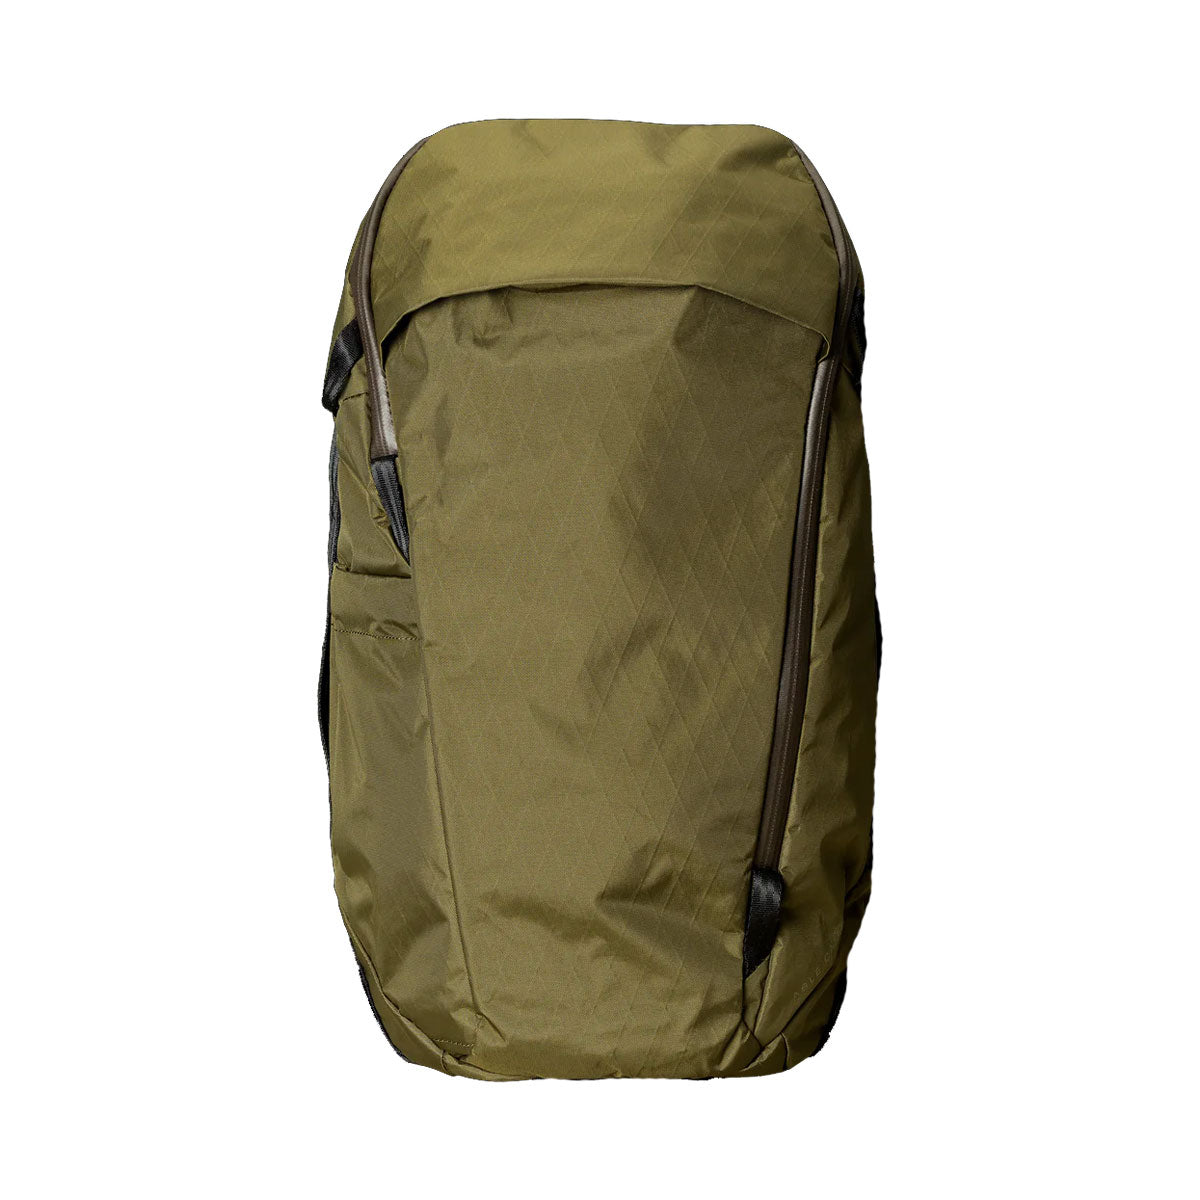 Able Carry : Daybreaker 2 : X-Pac Olive Green (X42)